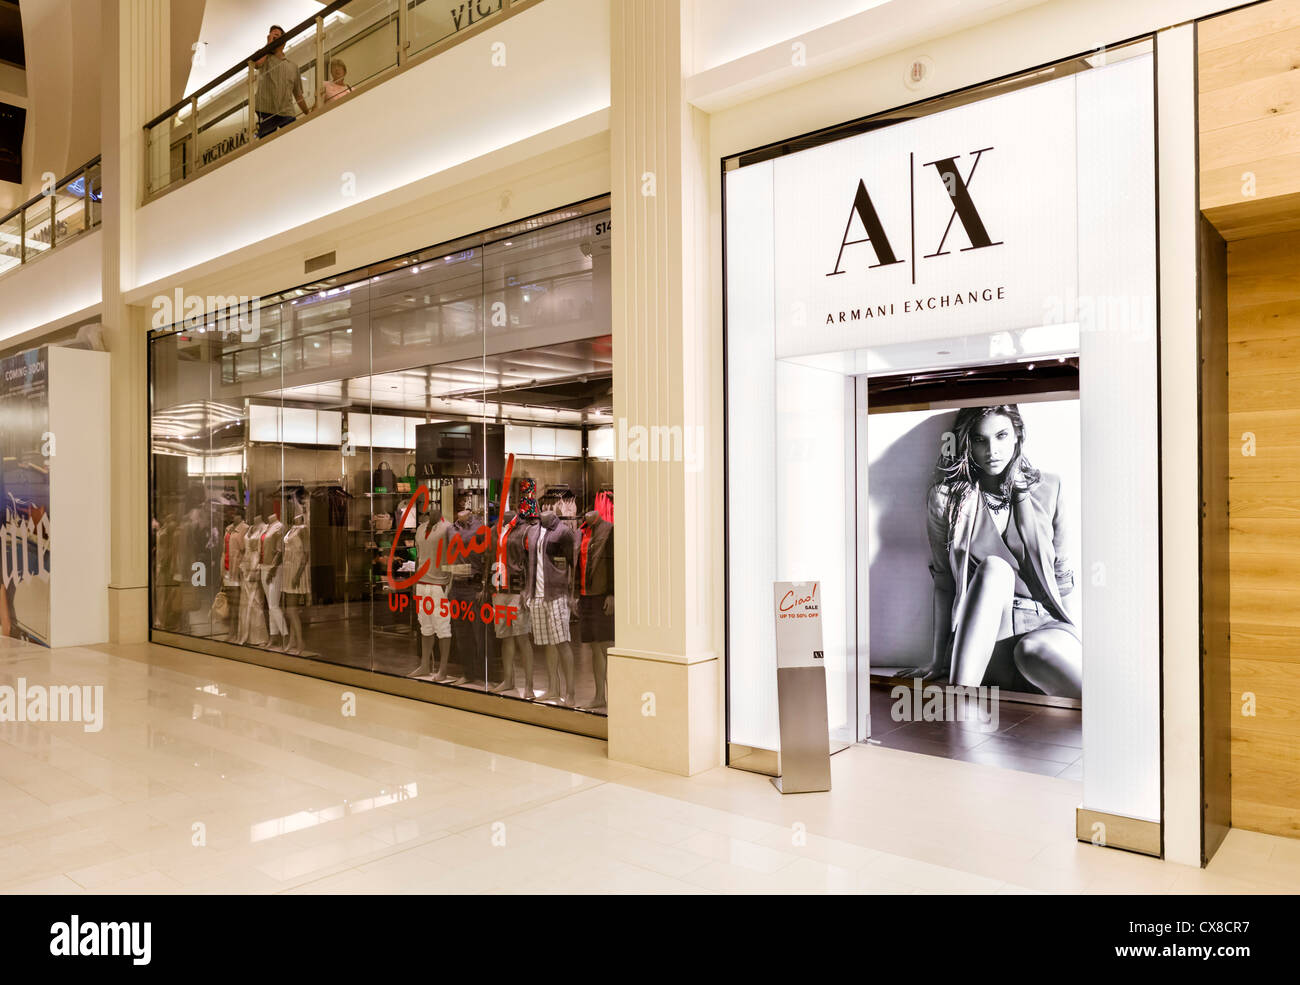 Armani exchange outlet. Аутлет Армани. Armani Exchange USA. Аутлет белая дача Армани эксчендж.